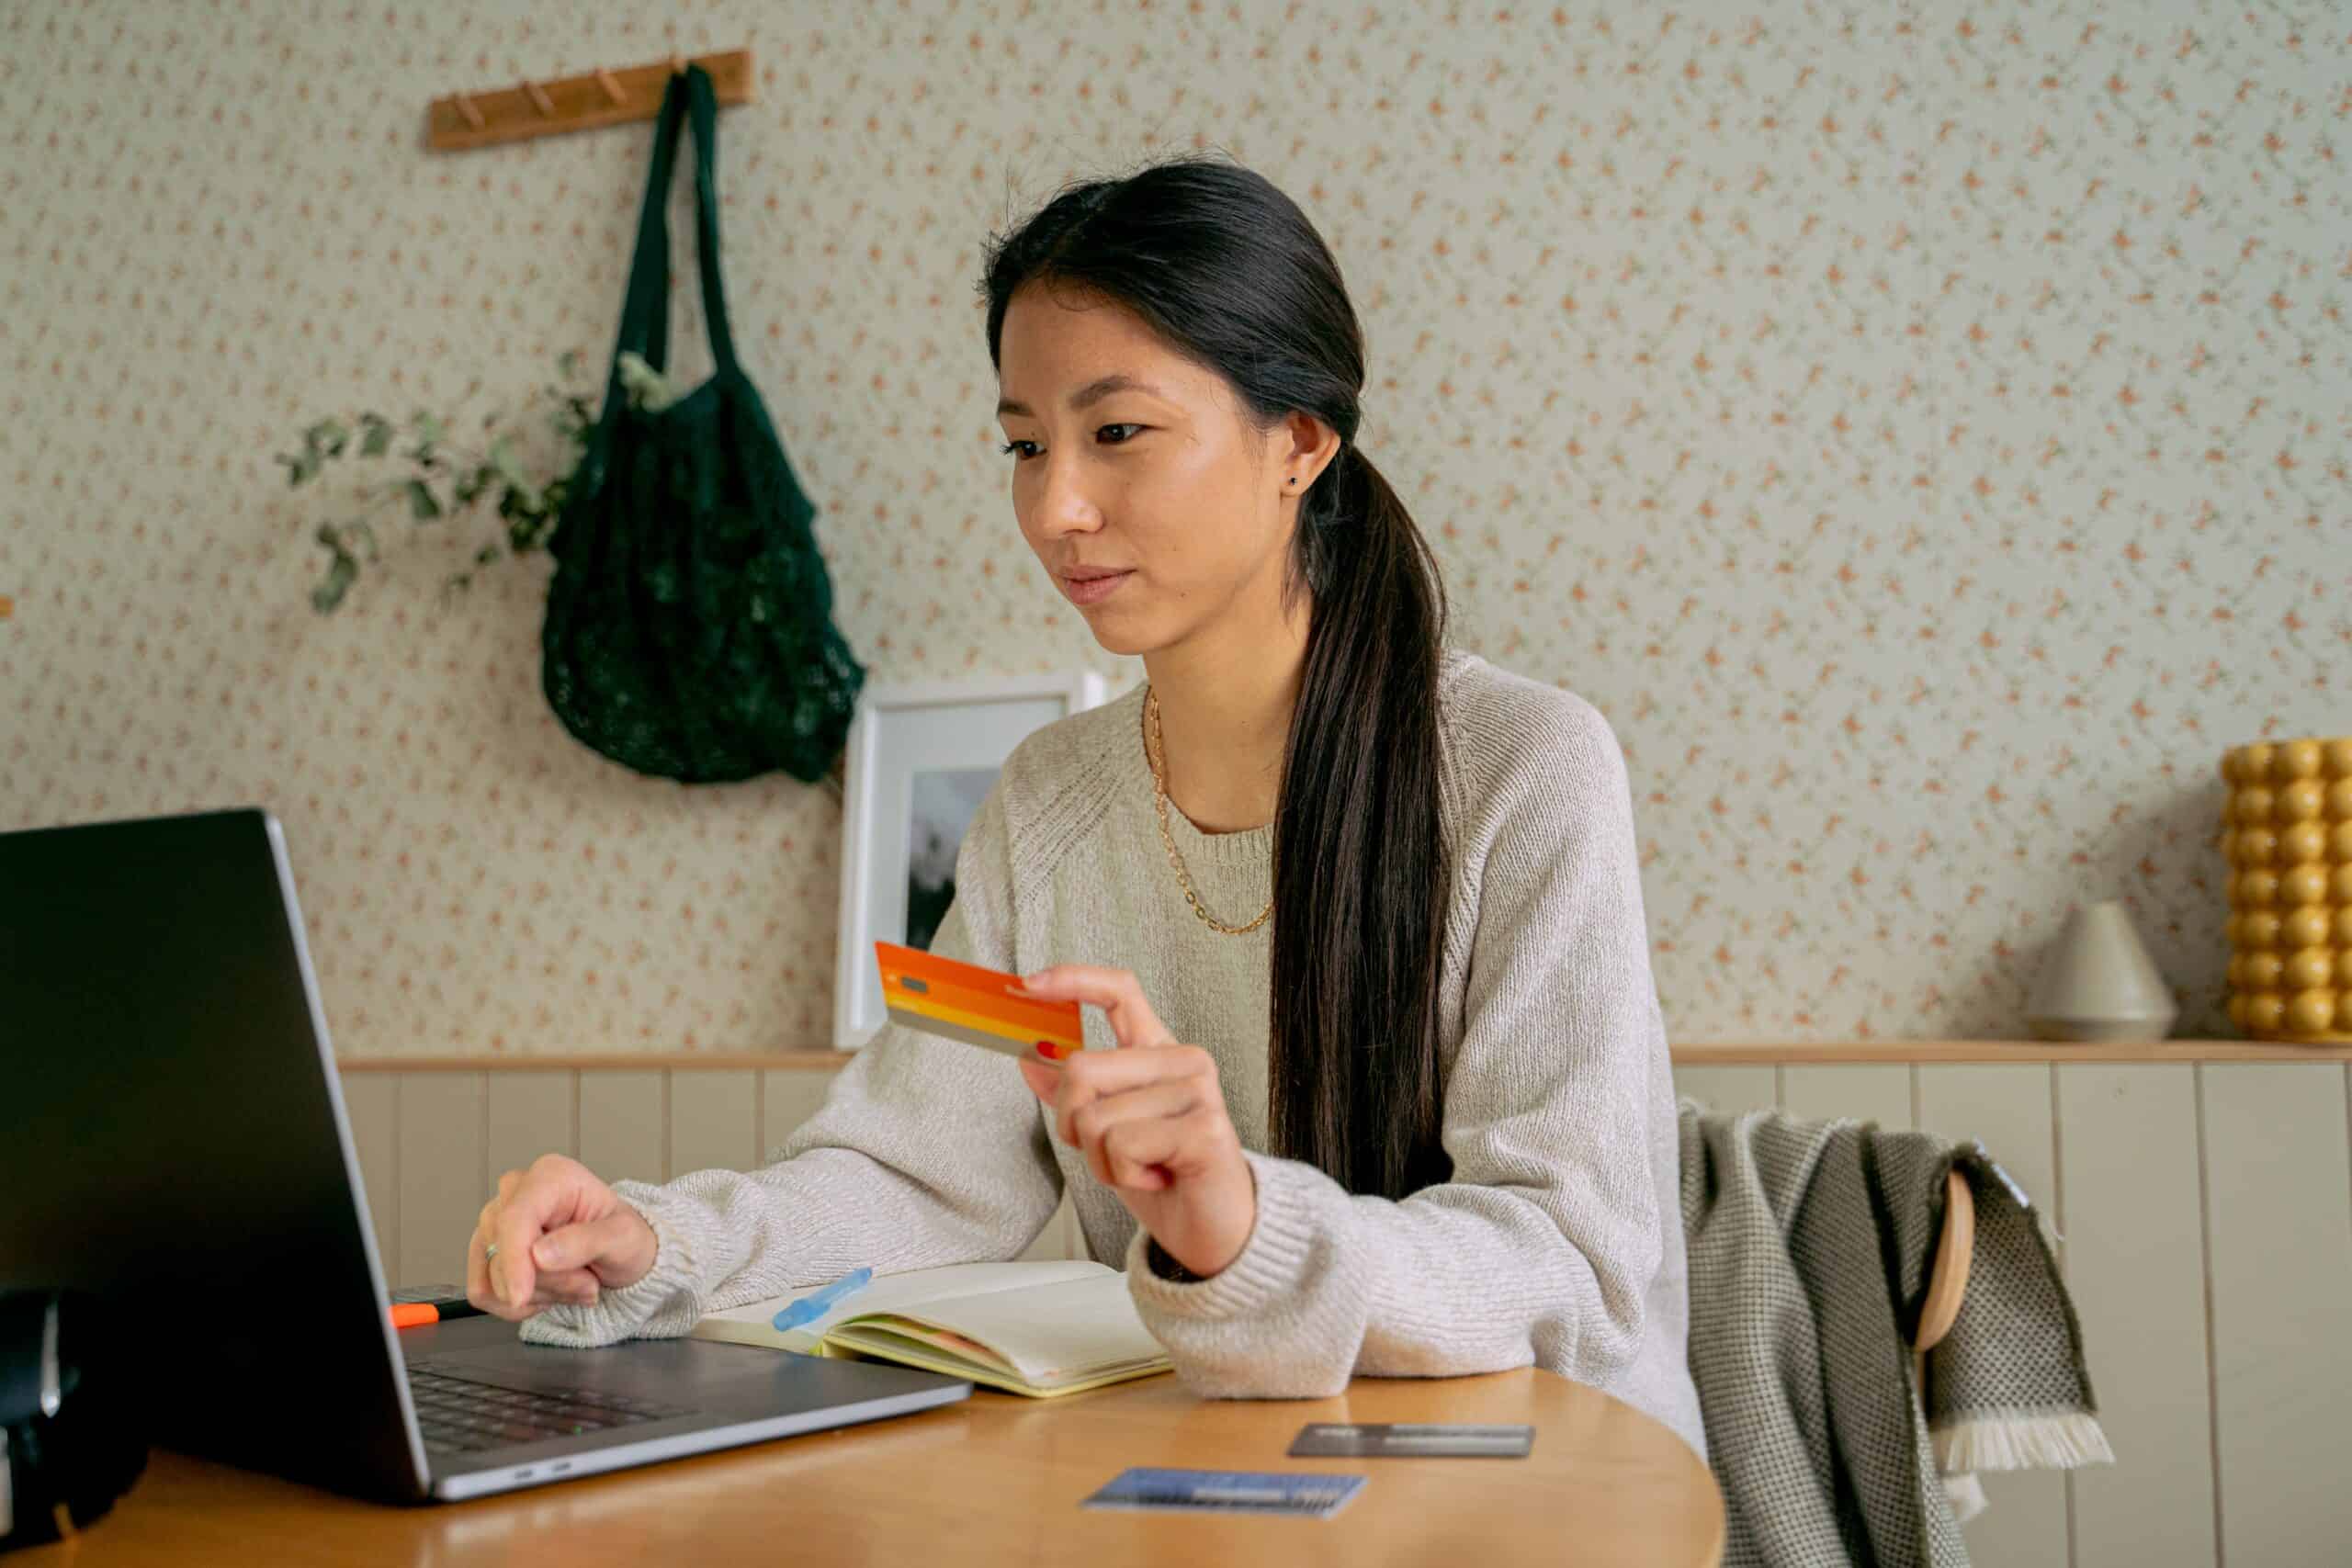 Woman holding credit card while looking at laptop.